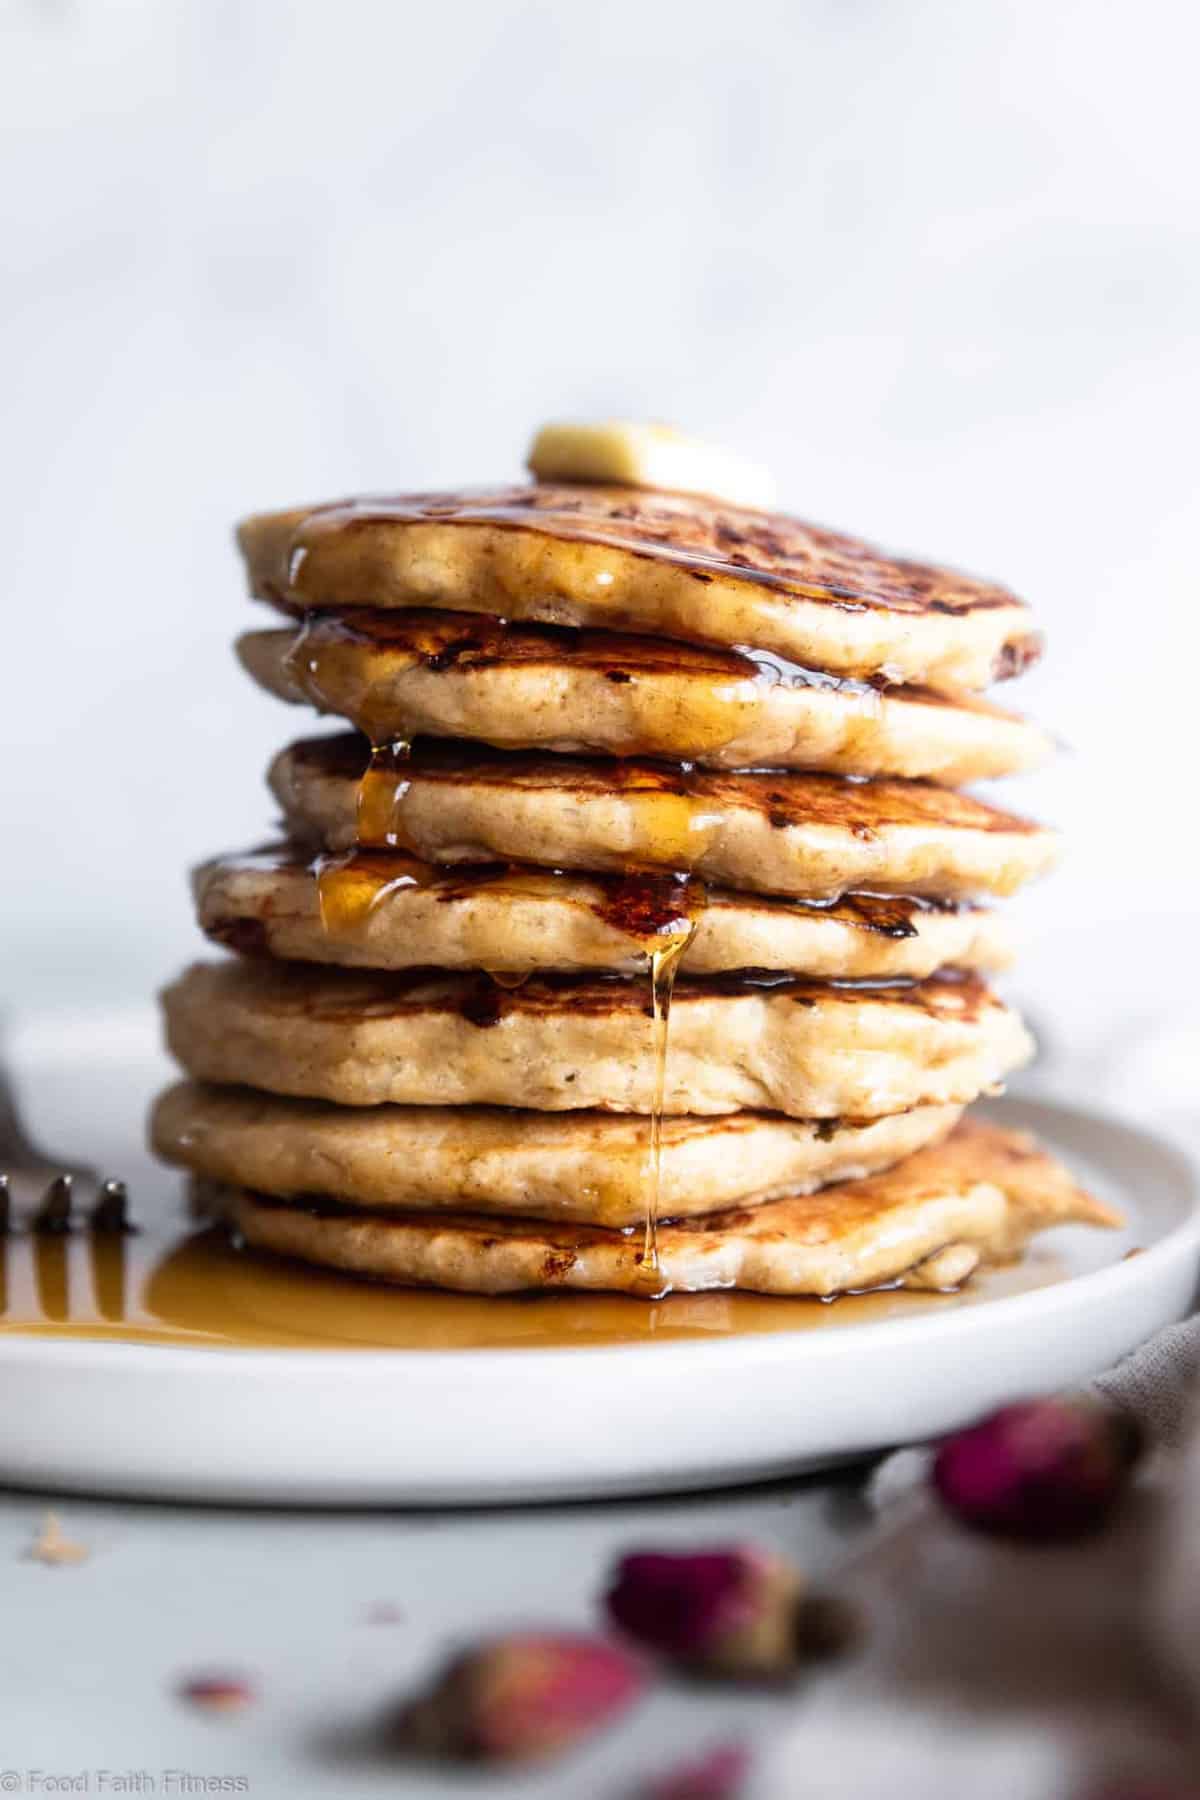 Cottage Cheese Protein Pancakes - These easy pancakes naturally gluten free and protein packed! Make them ahead for healthy breakfasts or make them on weekends! Great for kids and adults. | #Foodfaithfitness | 